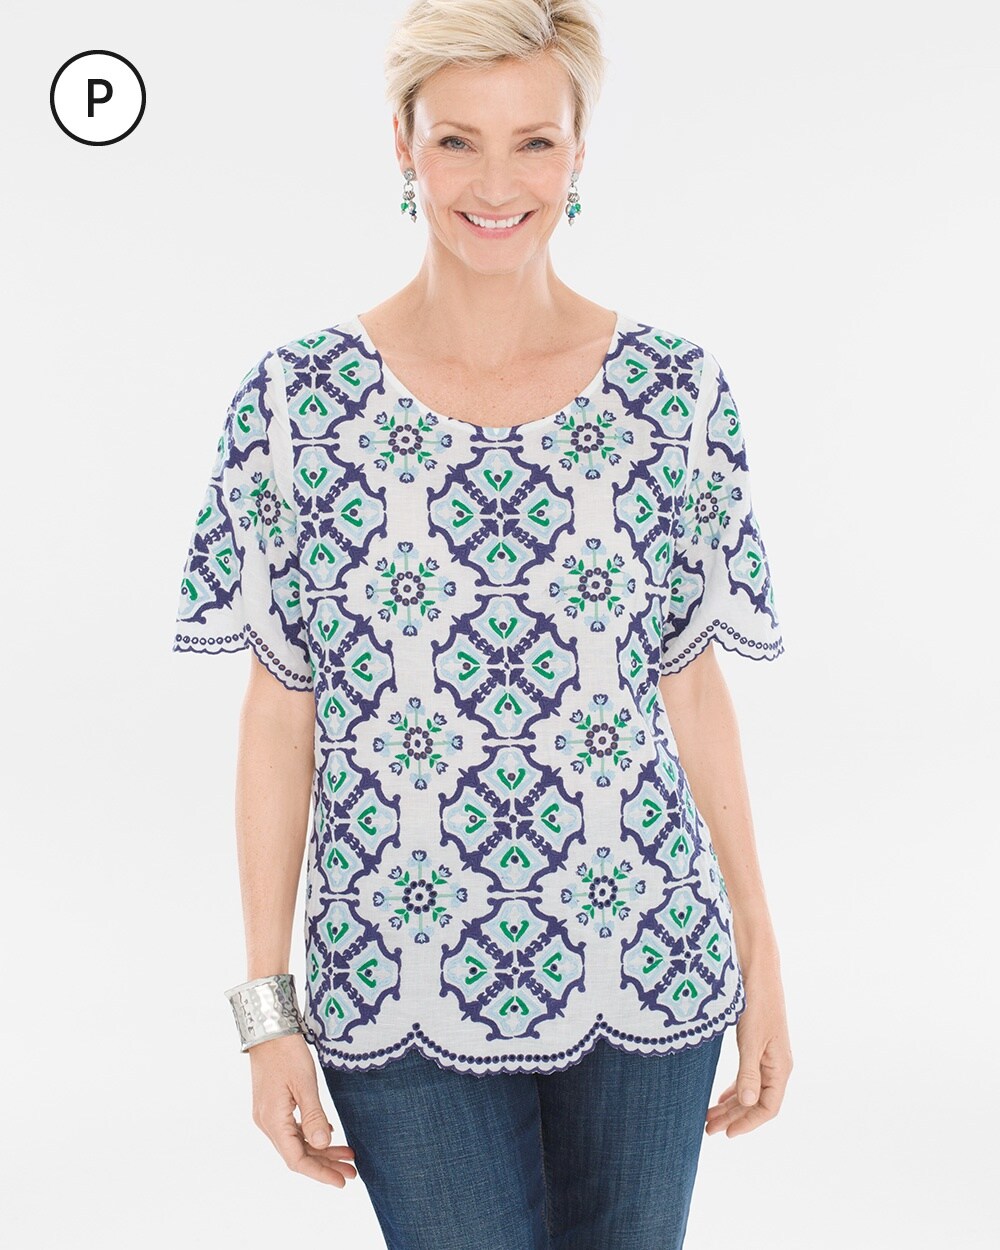 Petite Tiled Embroidery Top